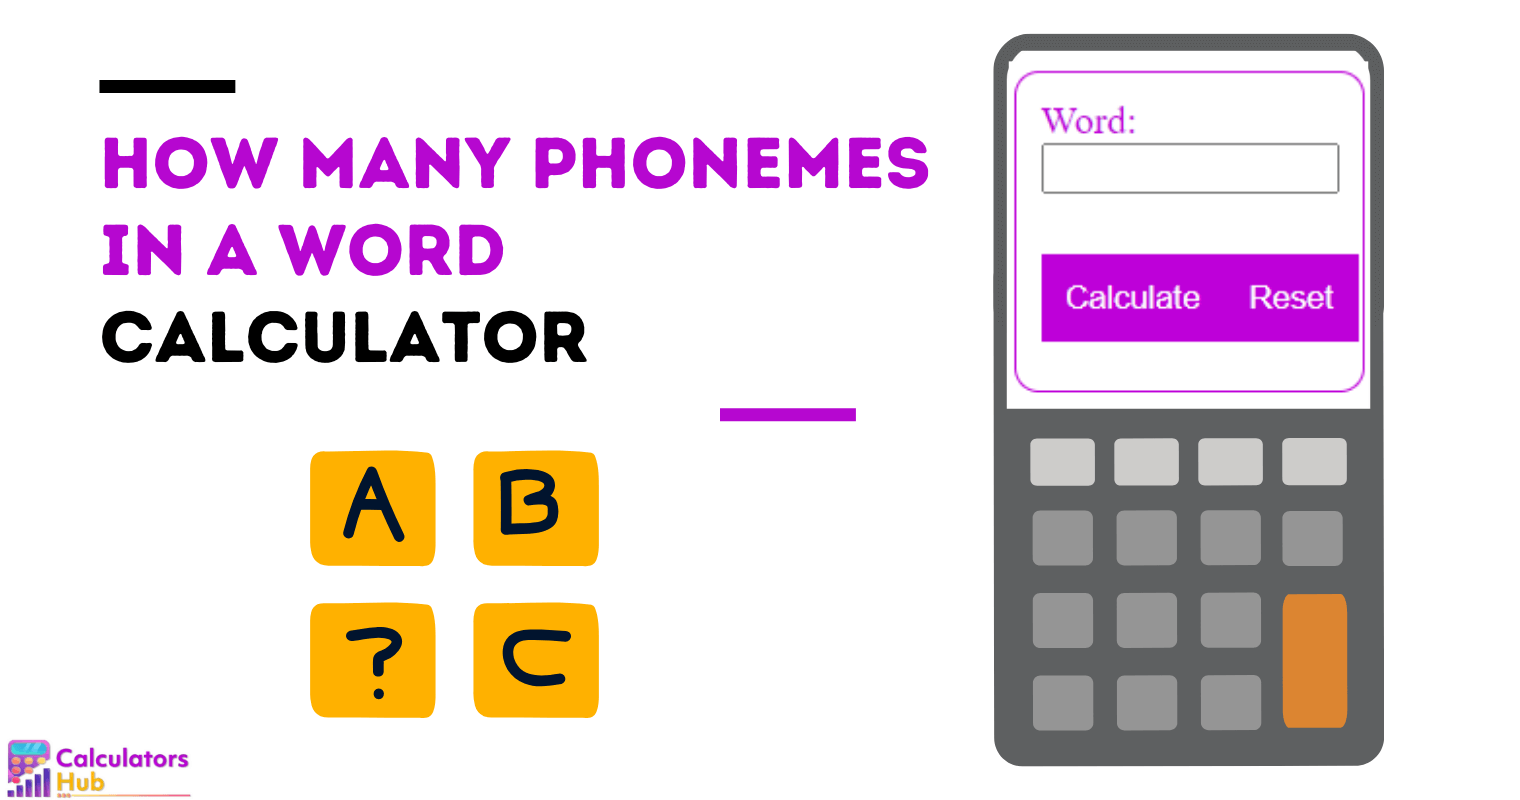 How Many Phonemes in a Word Calculator